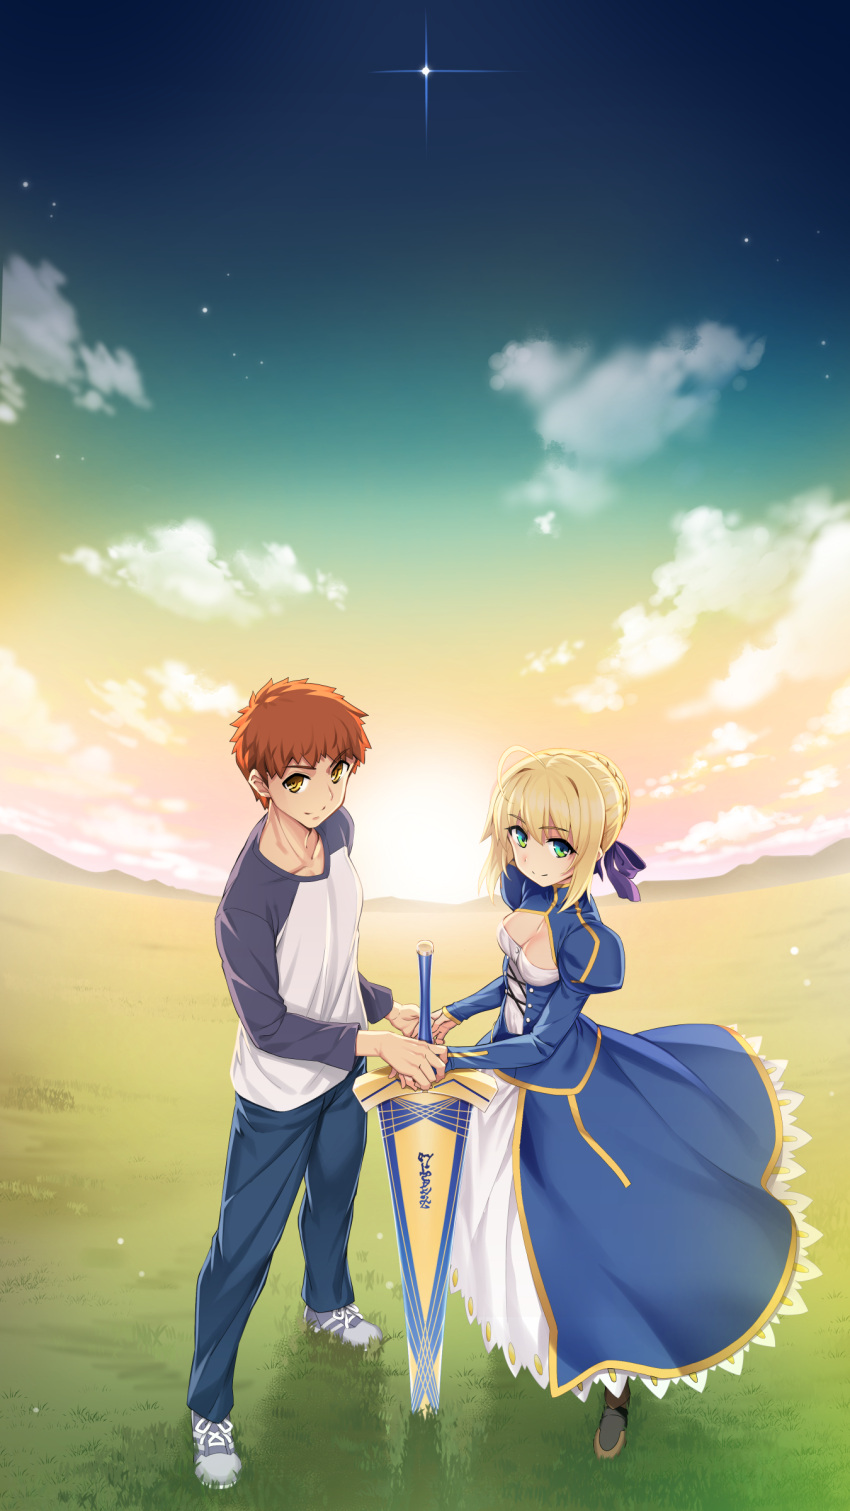 1boy 1girl absurdres ahoge anniversary artoria_pendragon_(fate) blonde_hair blue_dress clouds dress emiya_shirou excalibur_(fate/stay_night) fate/stay_night fate_(series) field green_eyes highres holding_hands looking_at_viewer namonashi orange_hair outdoors saber_(fate) shirt shoes sky smile sneakers star_(sky) sword weapon yellow_eyes